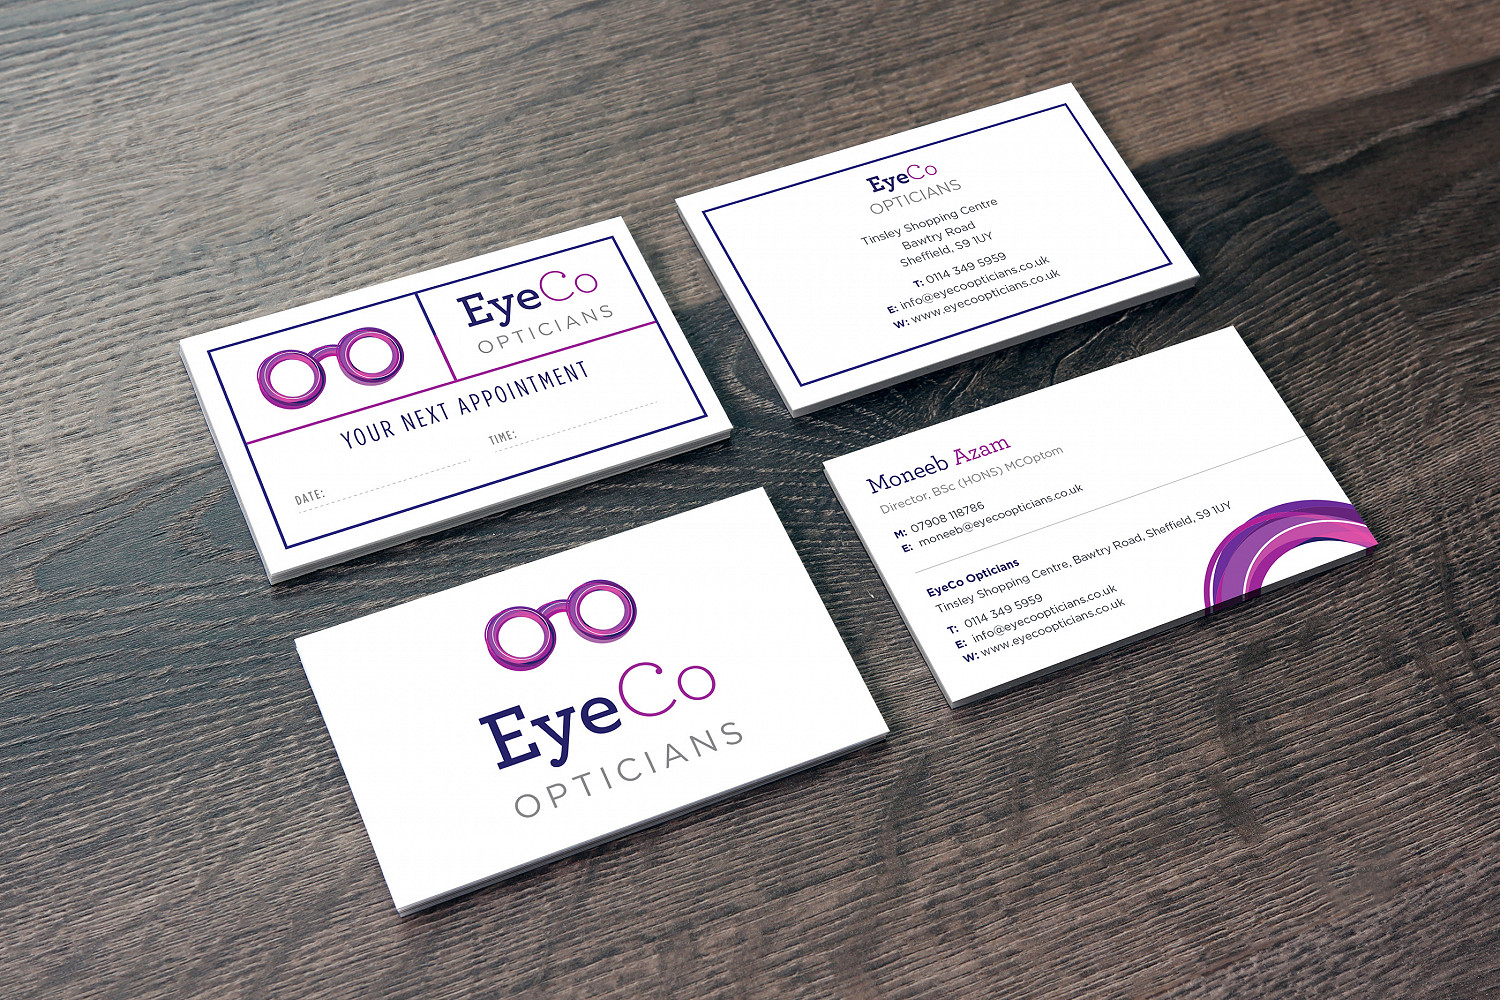 Eyeco Appt Card and Business Card